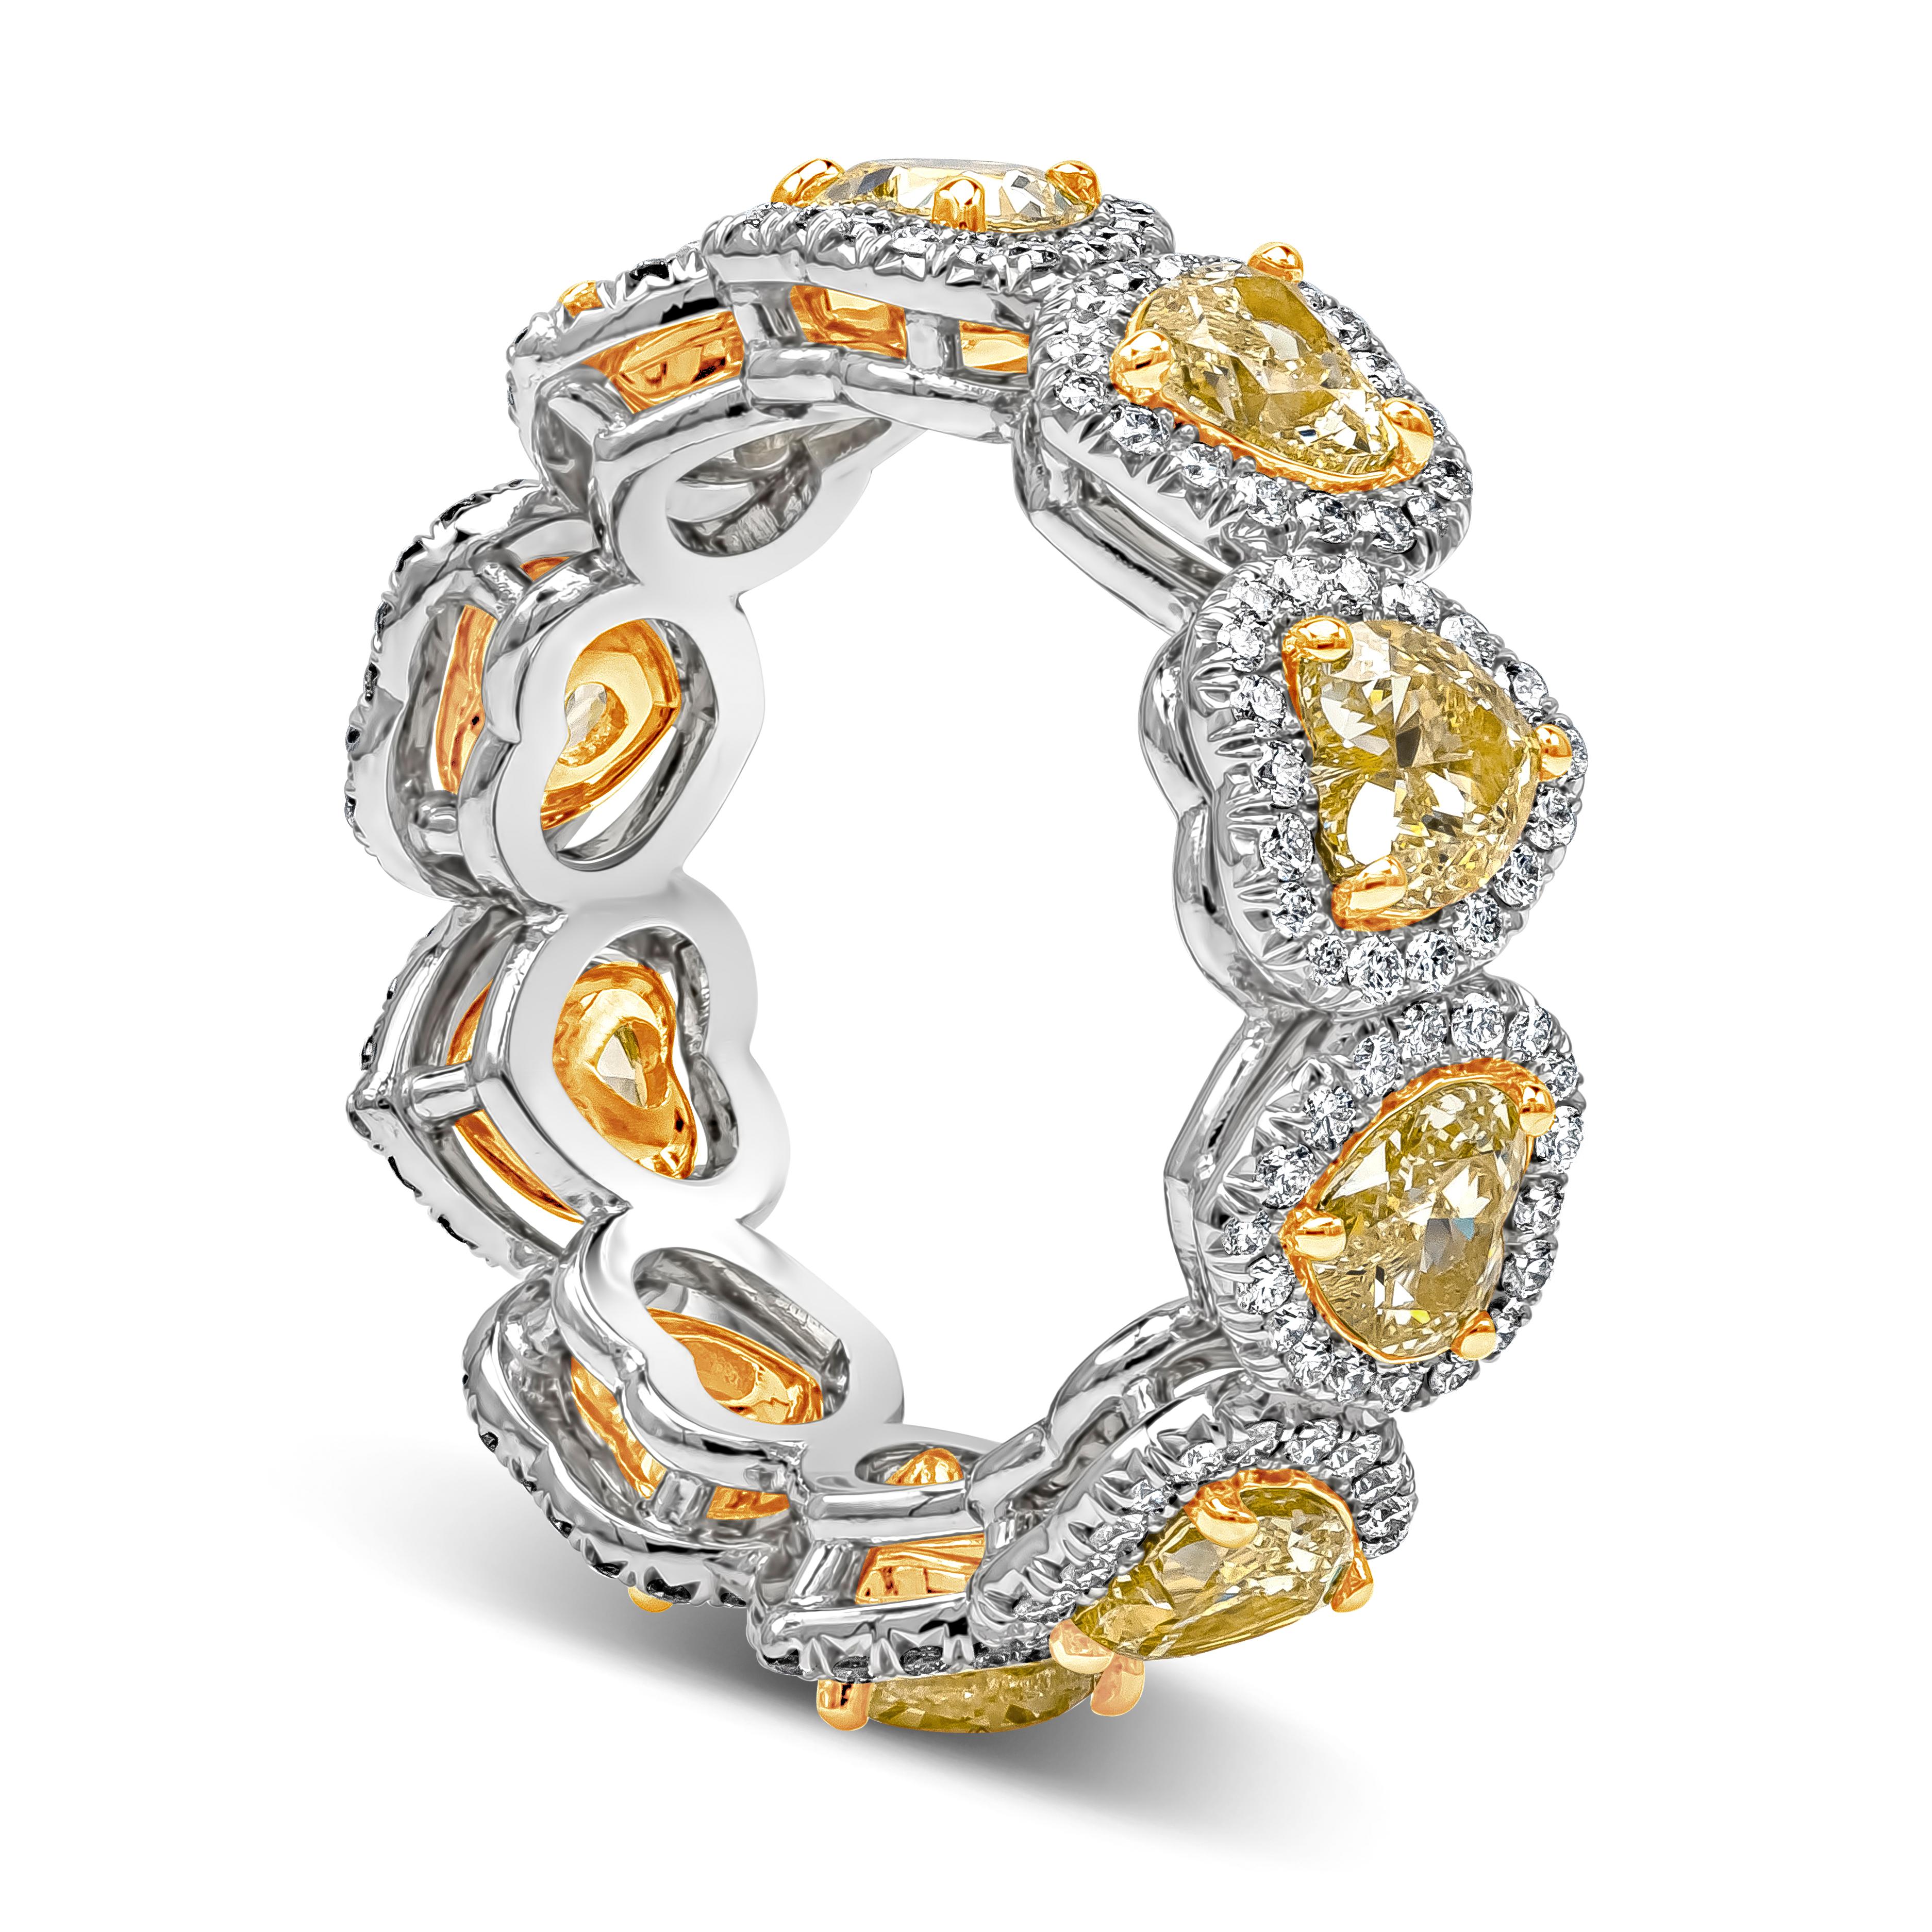 A stylish wedding band style showcasing vibrant heart shape fancy yellow diamonds weighing 3.64 carats total, VS in Clarity, Mounted in 18K Yellow Gold three-prong setting. Each surrounded by a single row of round brilliant diamonds weighing 0.74